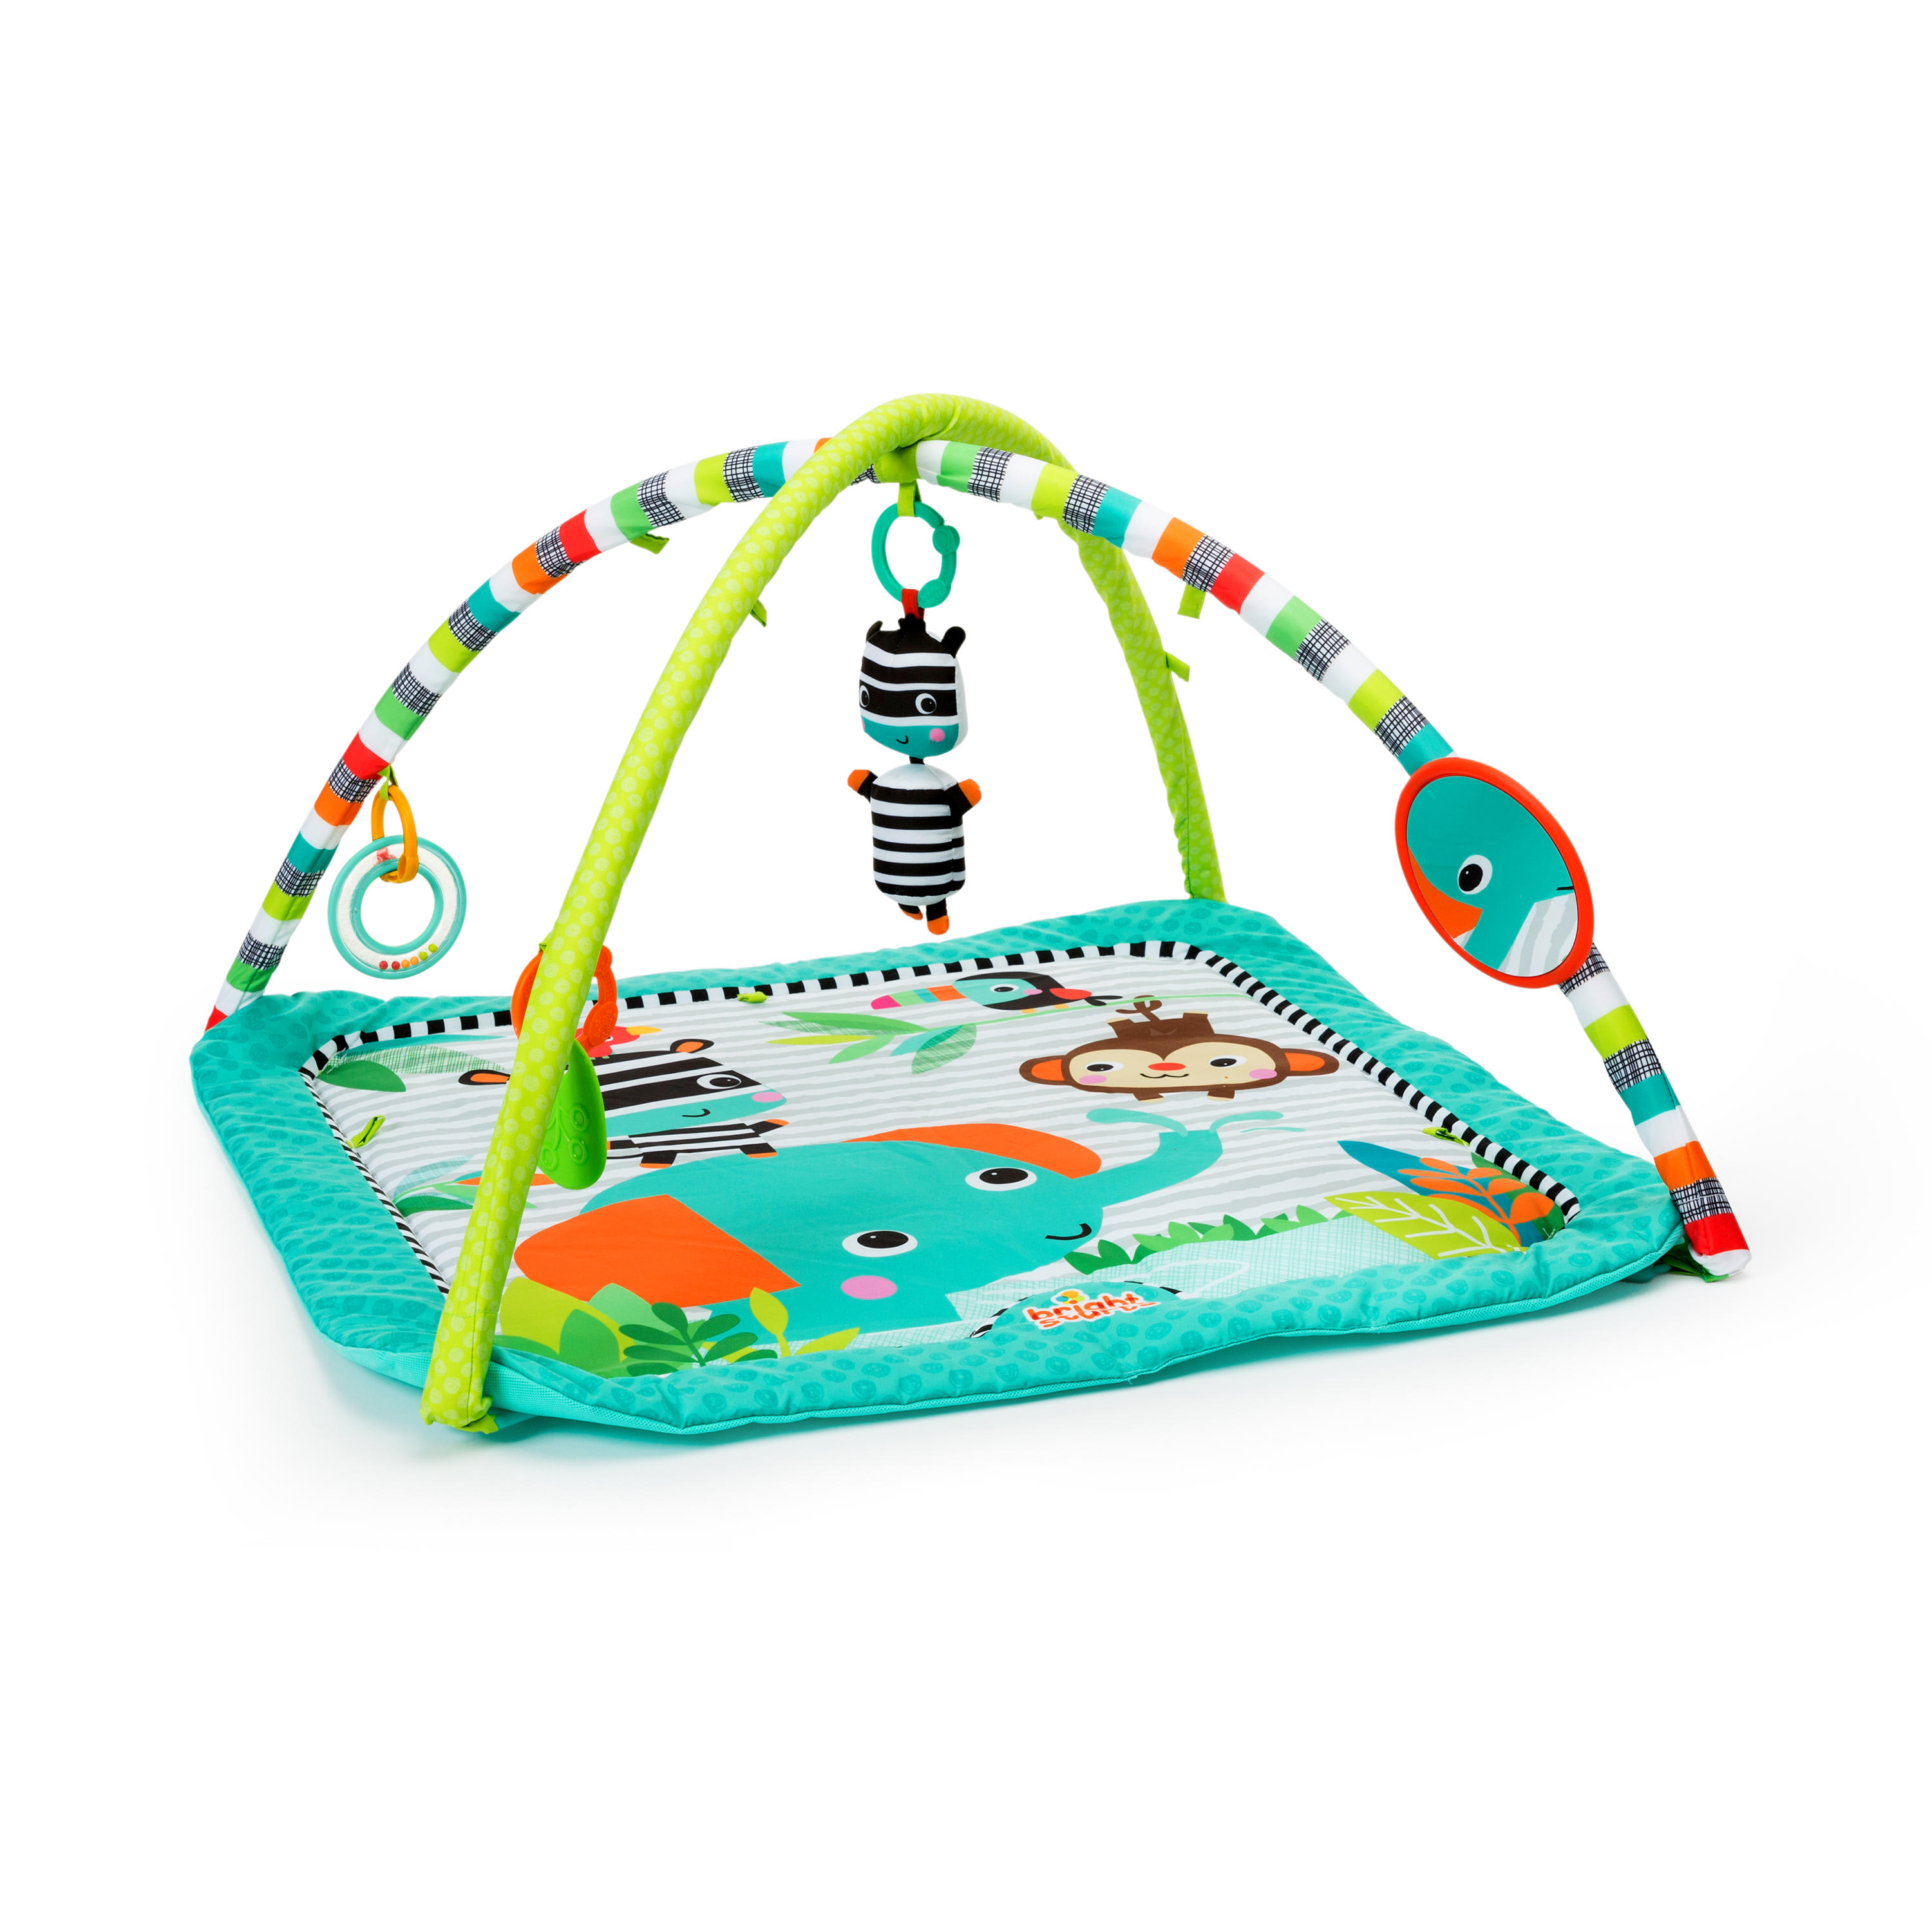 Bright Starts Zig Zag Safari Baby Activity Gym and Play Mat with Toys for Newborns and up - image 1 of 8